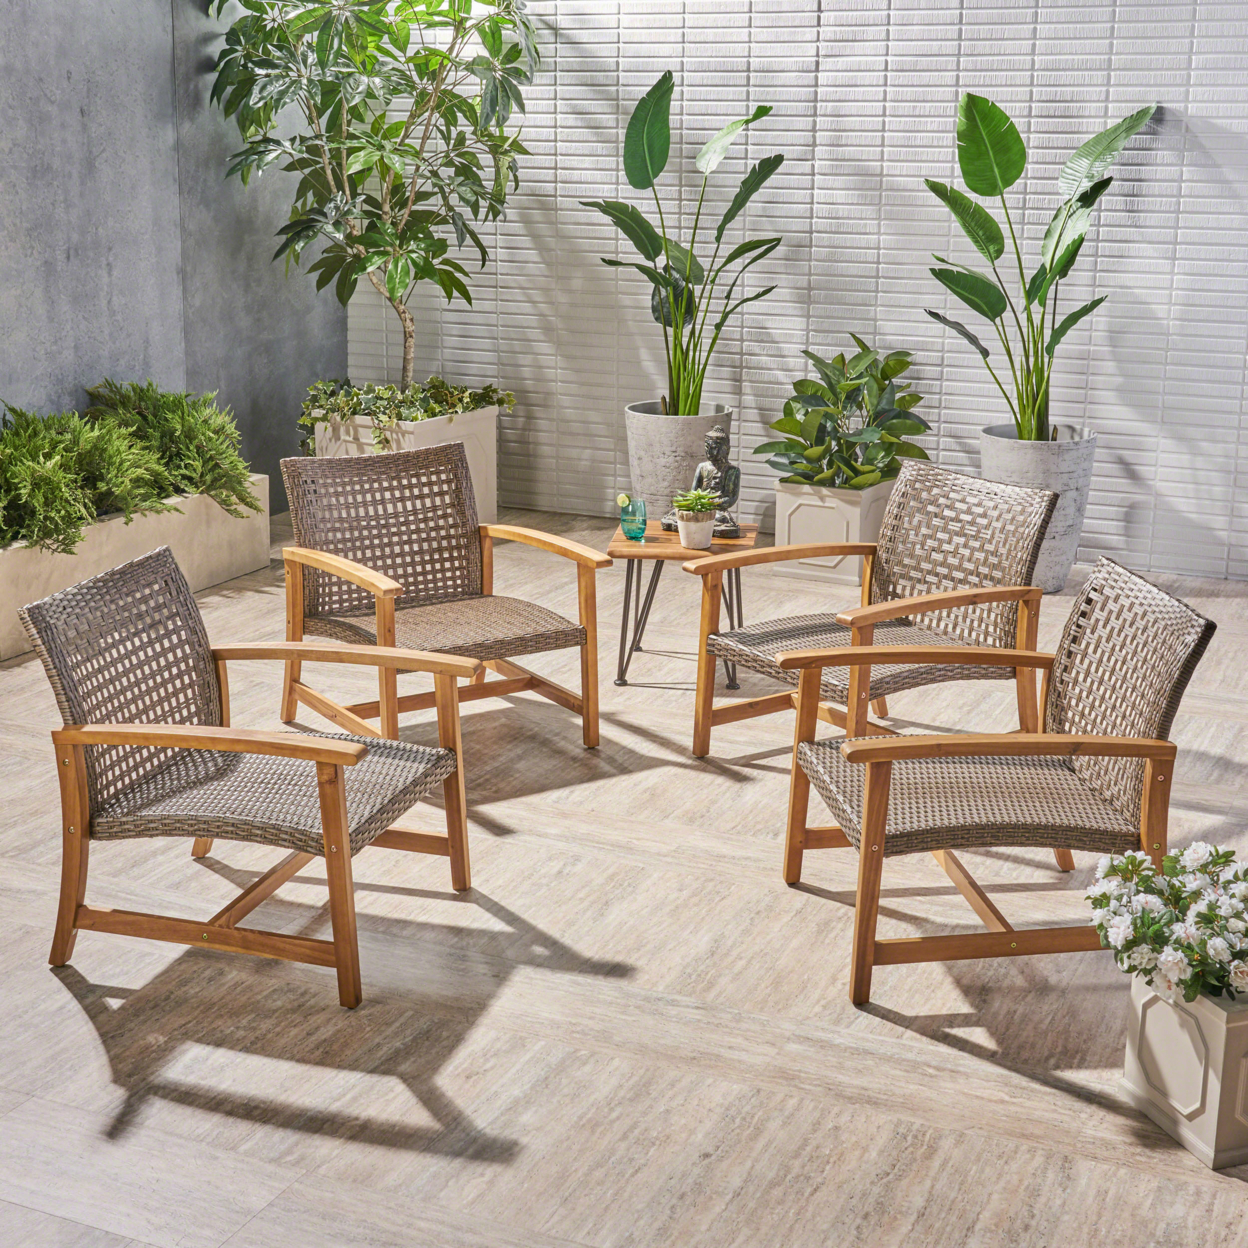 Viola Outdoor Wood And Wicker Club Chairs - Teak Finish + Mixed Mocha, Set Of 4